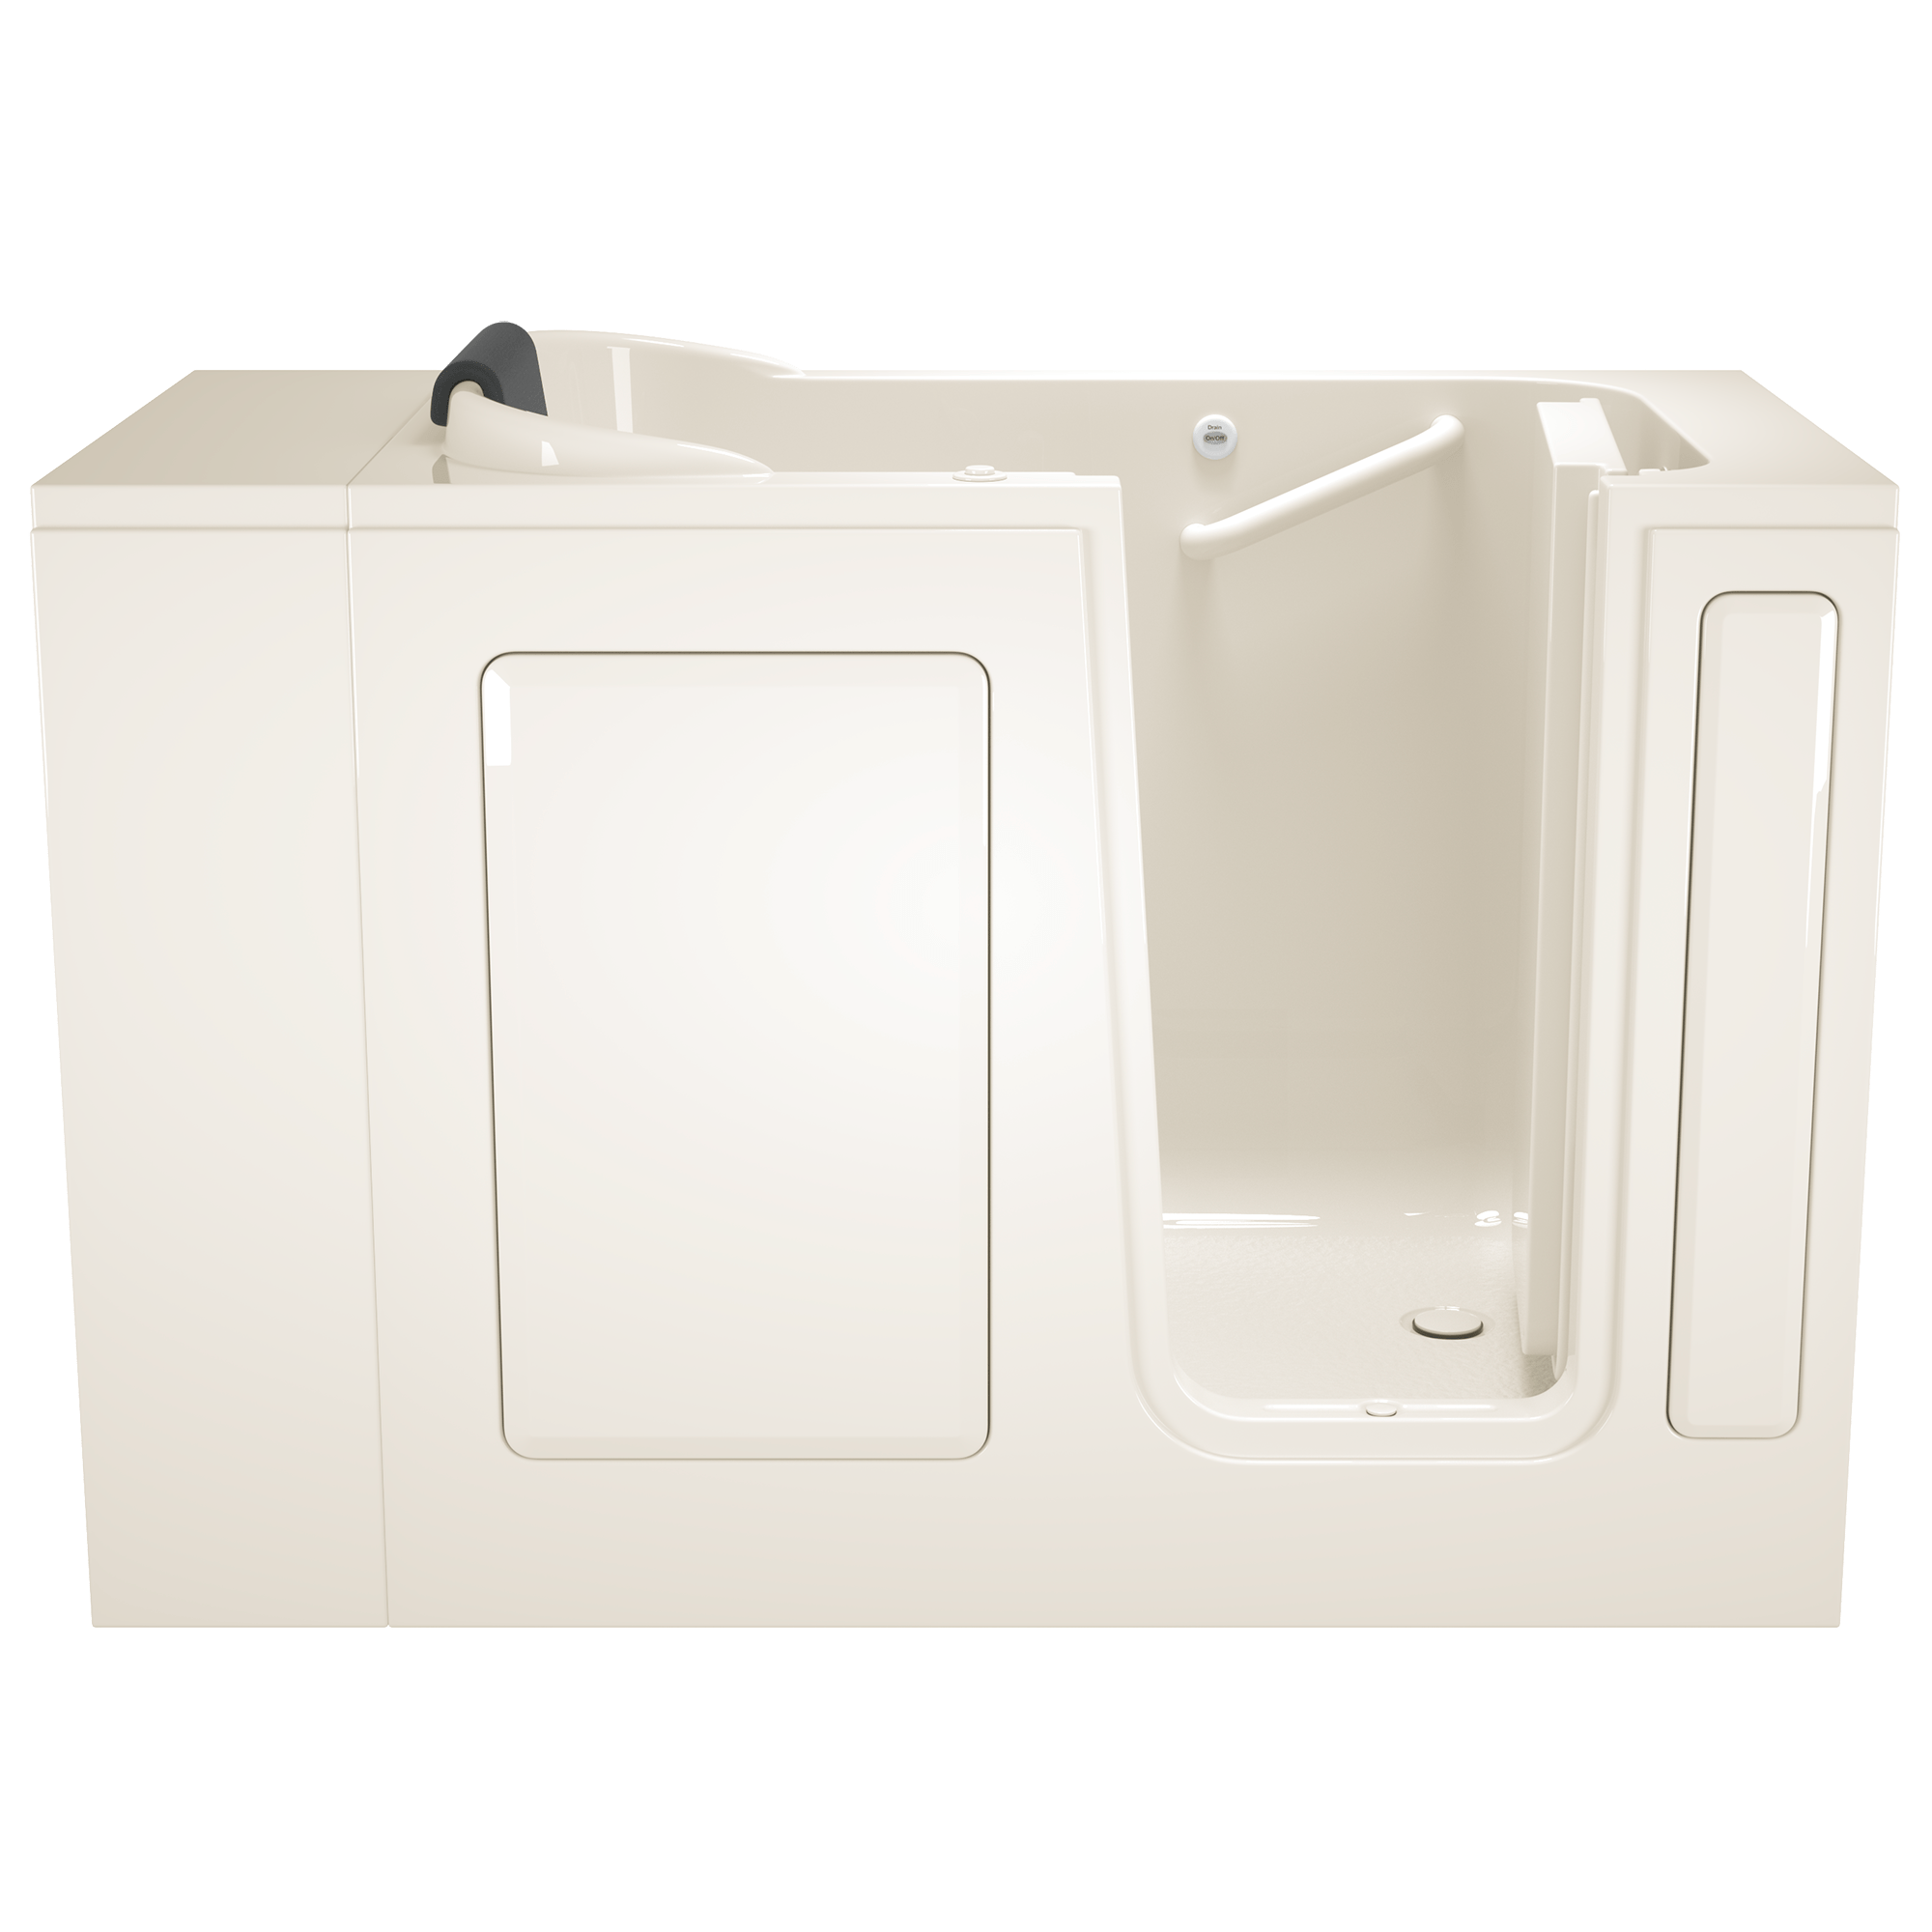 Gelcoat Premium Series 28 x 48-Inch Walk-in Tub With Air Spa System - Right-Hand Drain